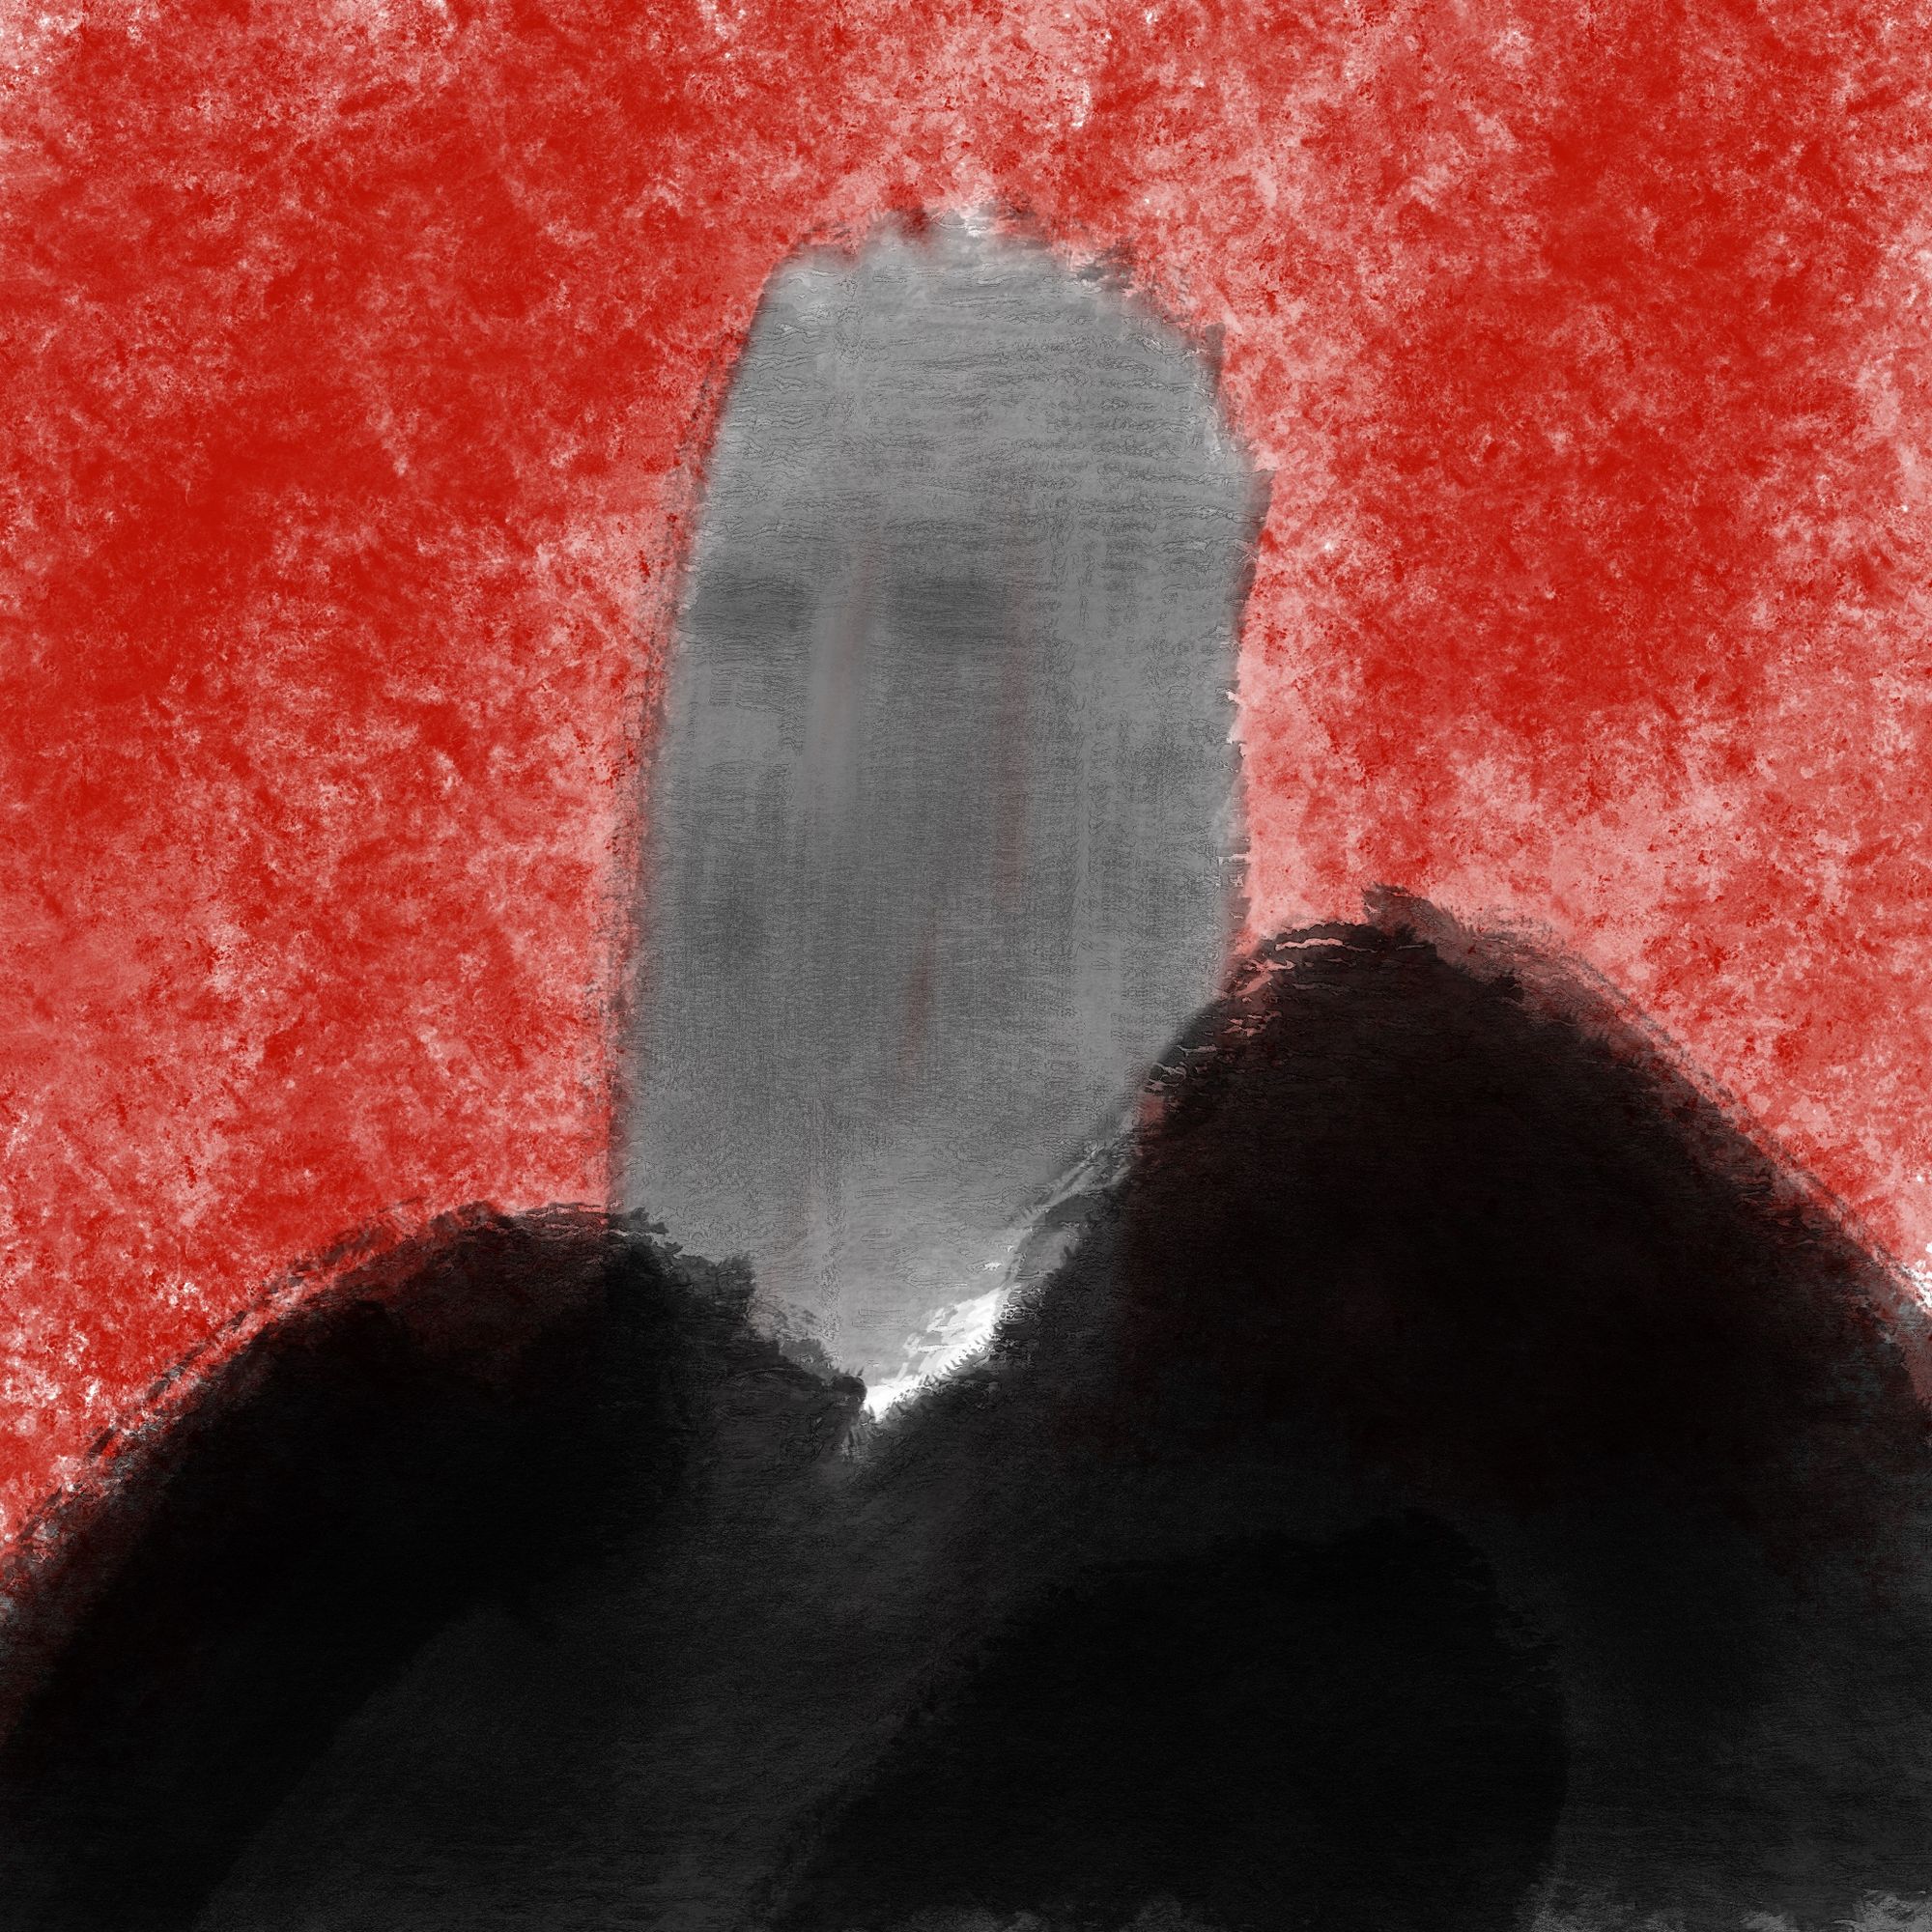 A black robed figure with a blank grey face against a blood-red background